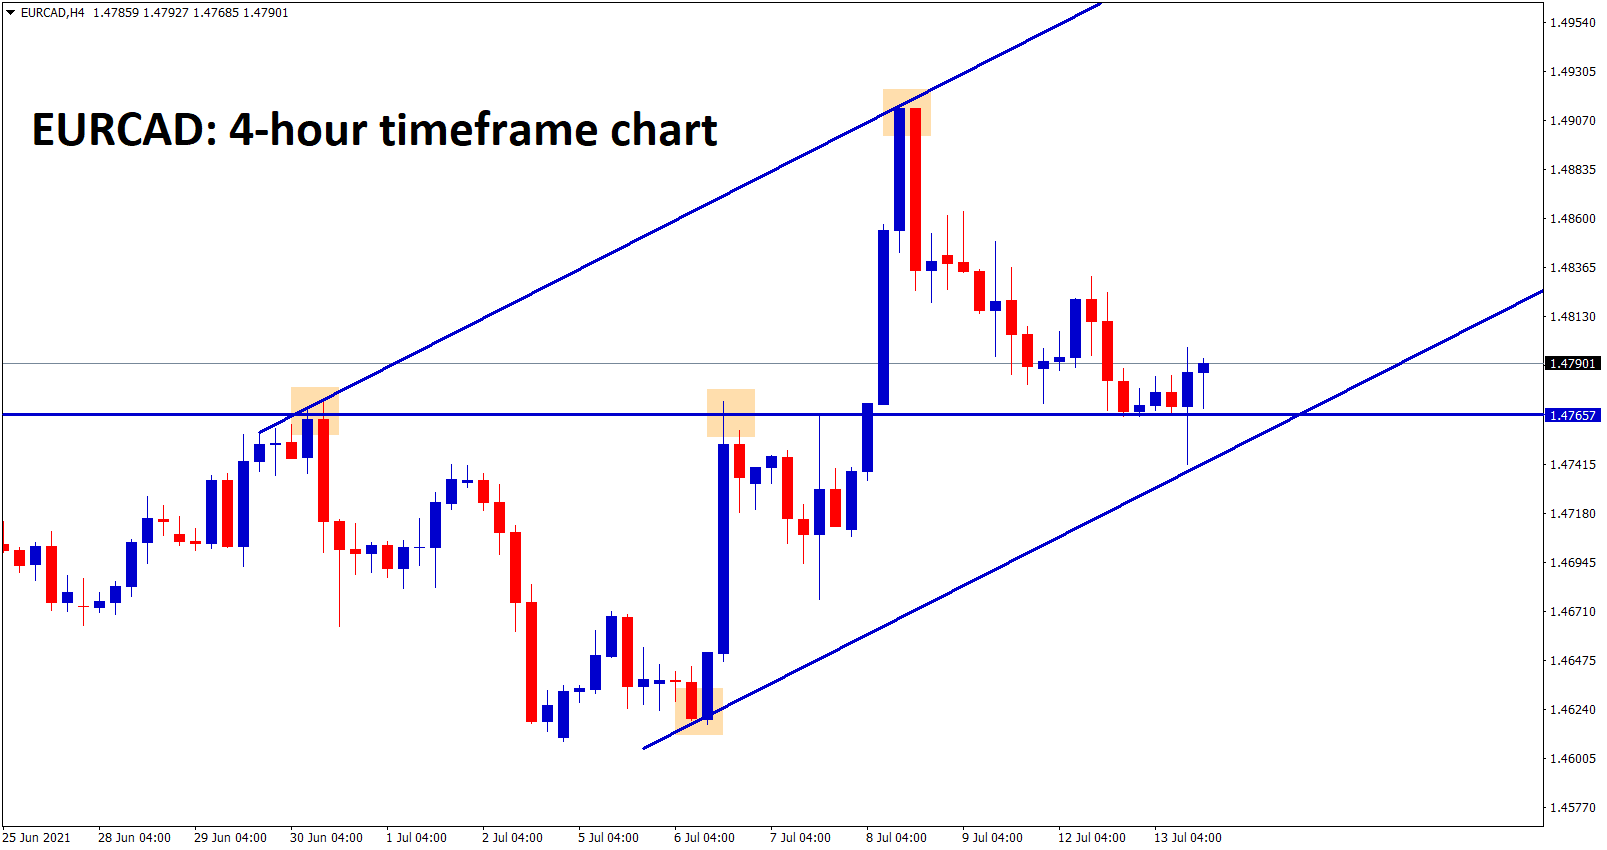 EURCAD is trying to bounce back back after hitting the higher low zone and recently broken resistance.